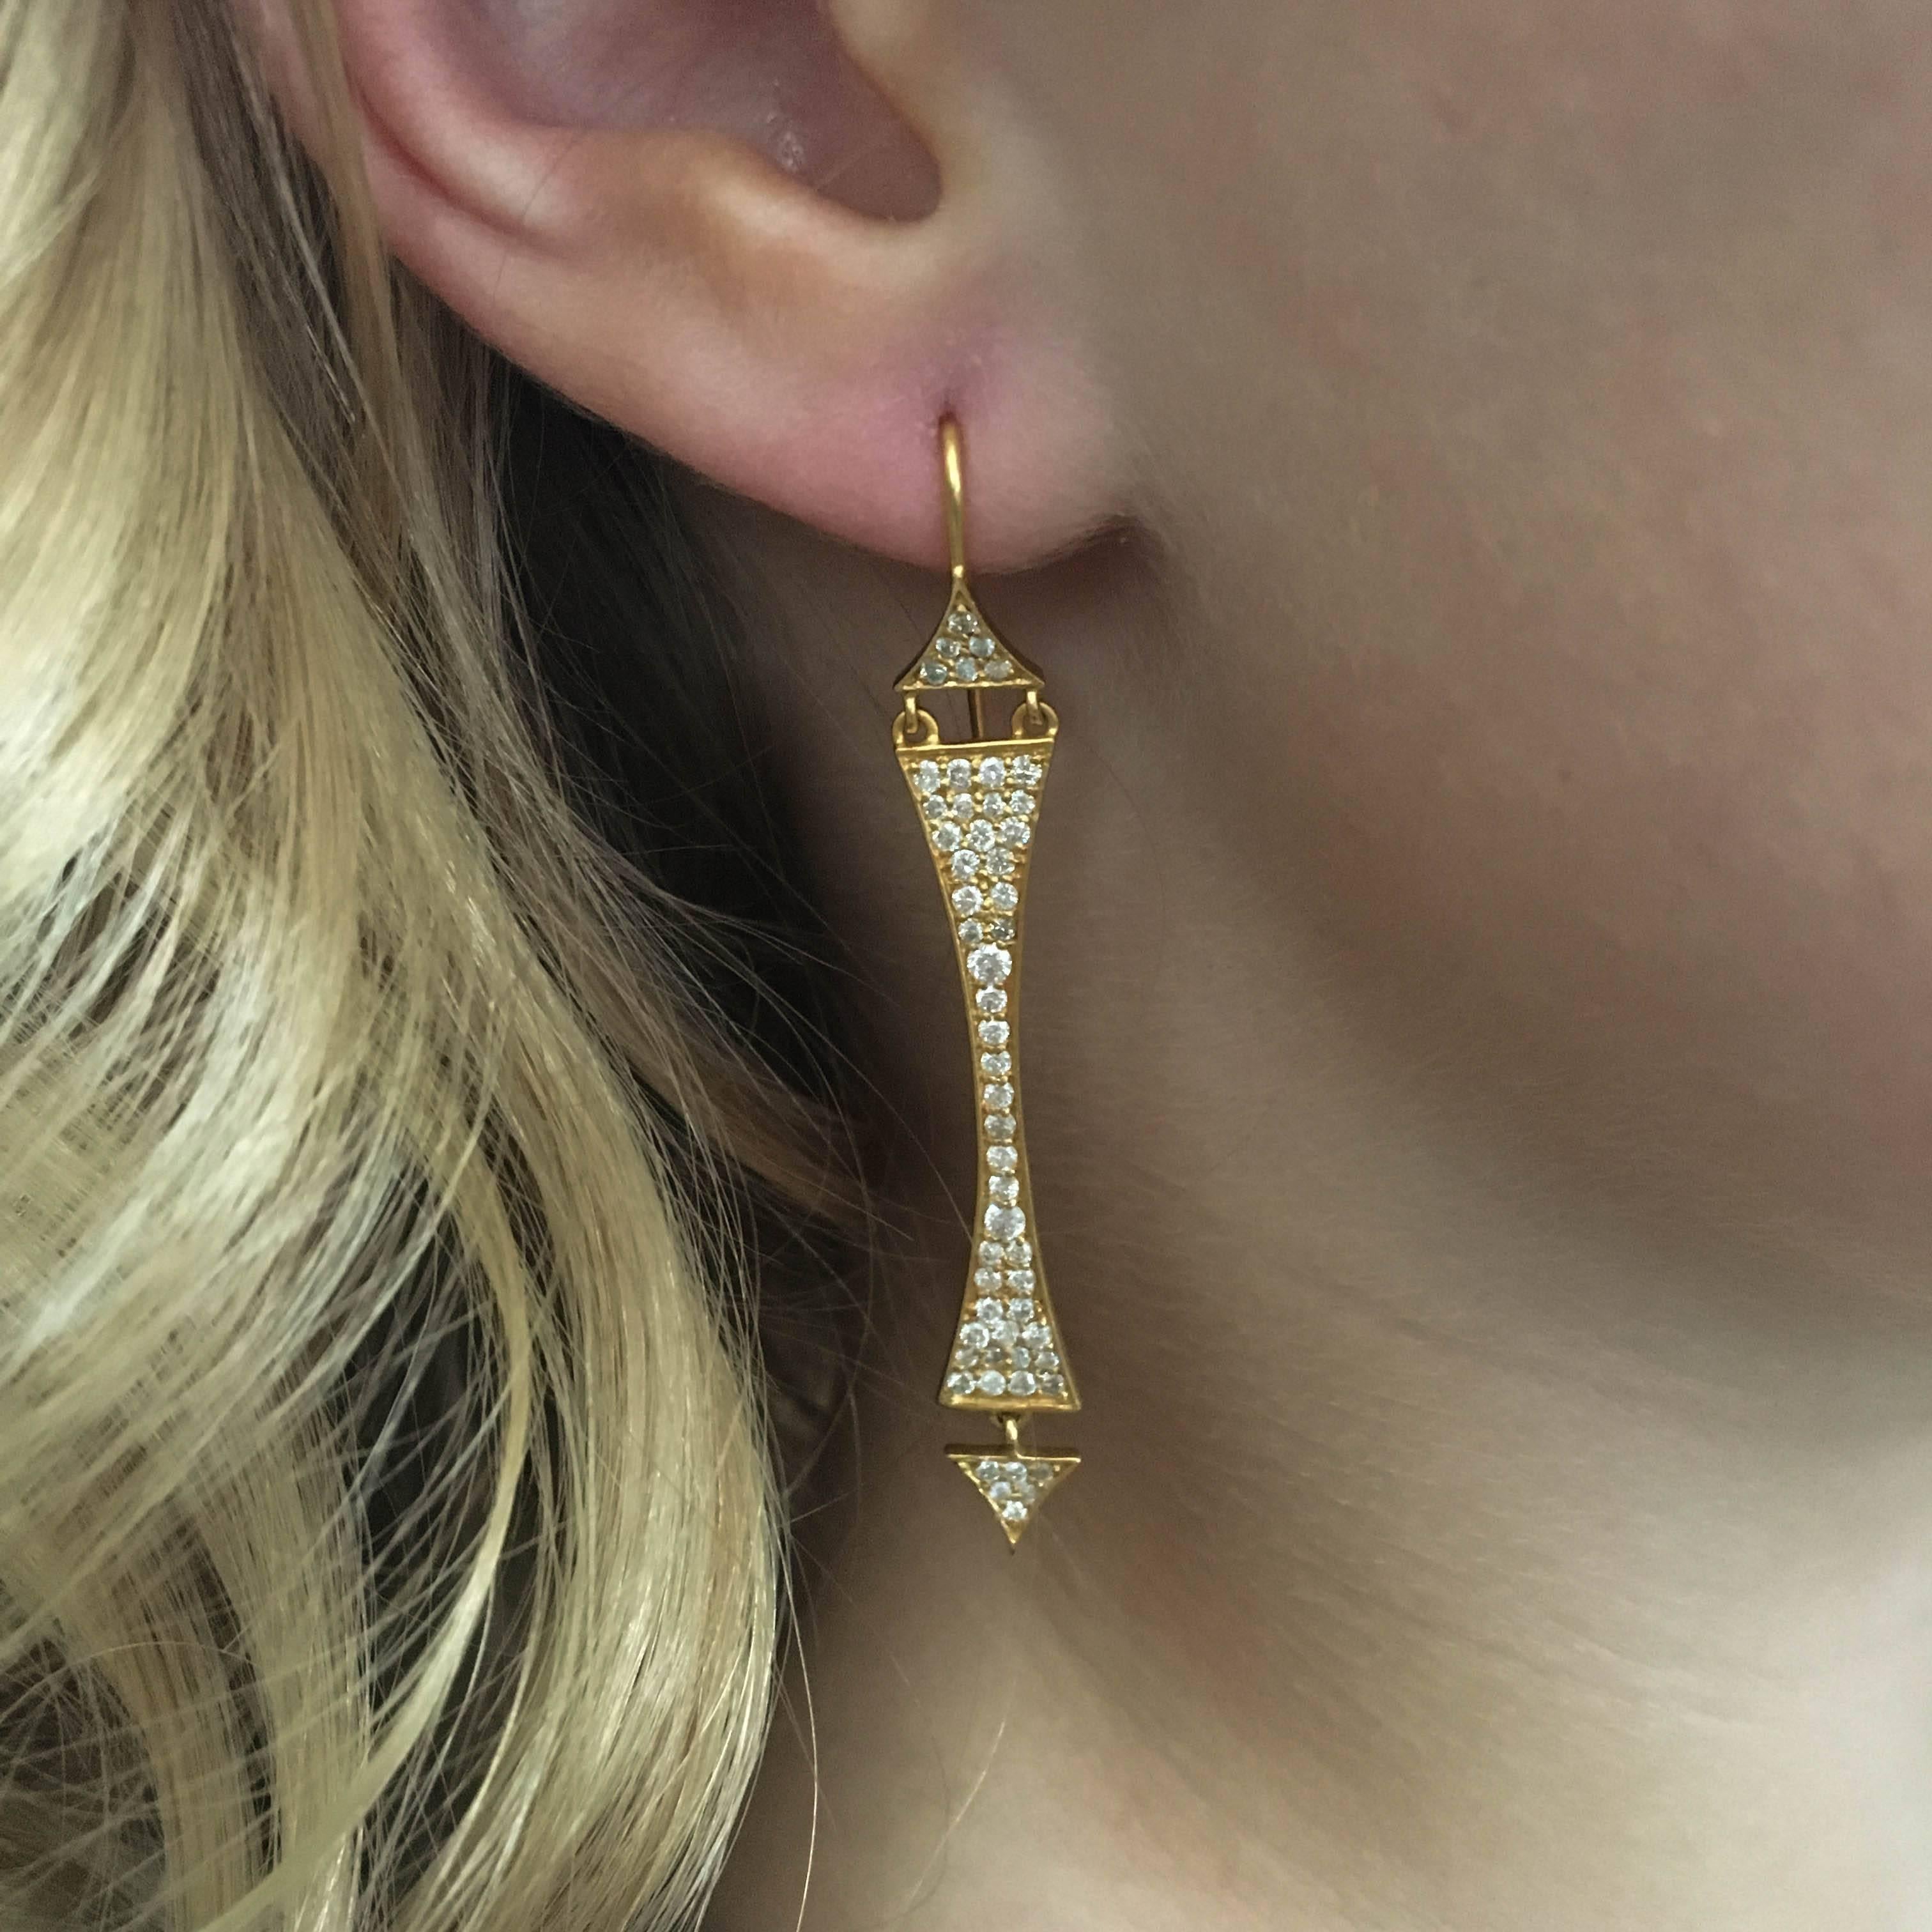 Architecturally inspired, these 18kt Gold and 1.28 carat diamond earrings are sure to get attention.  Matte Gold, extremely lightweight and jointed, so they move fluidly on the ear.  Lovely for any occasion.  Certain to get compliments!